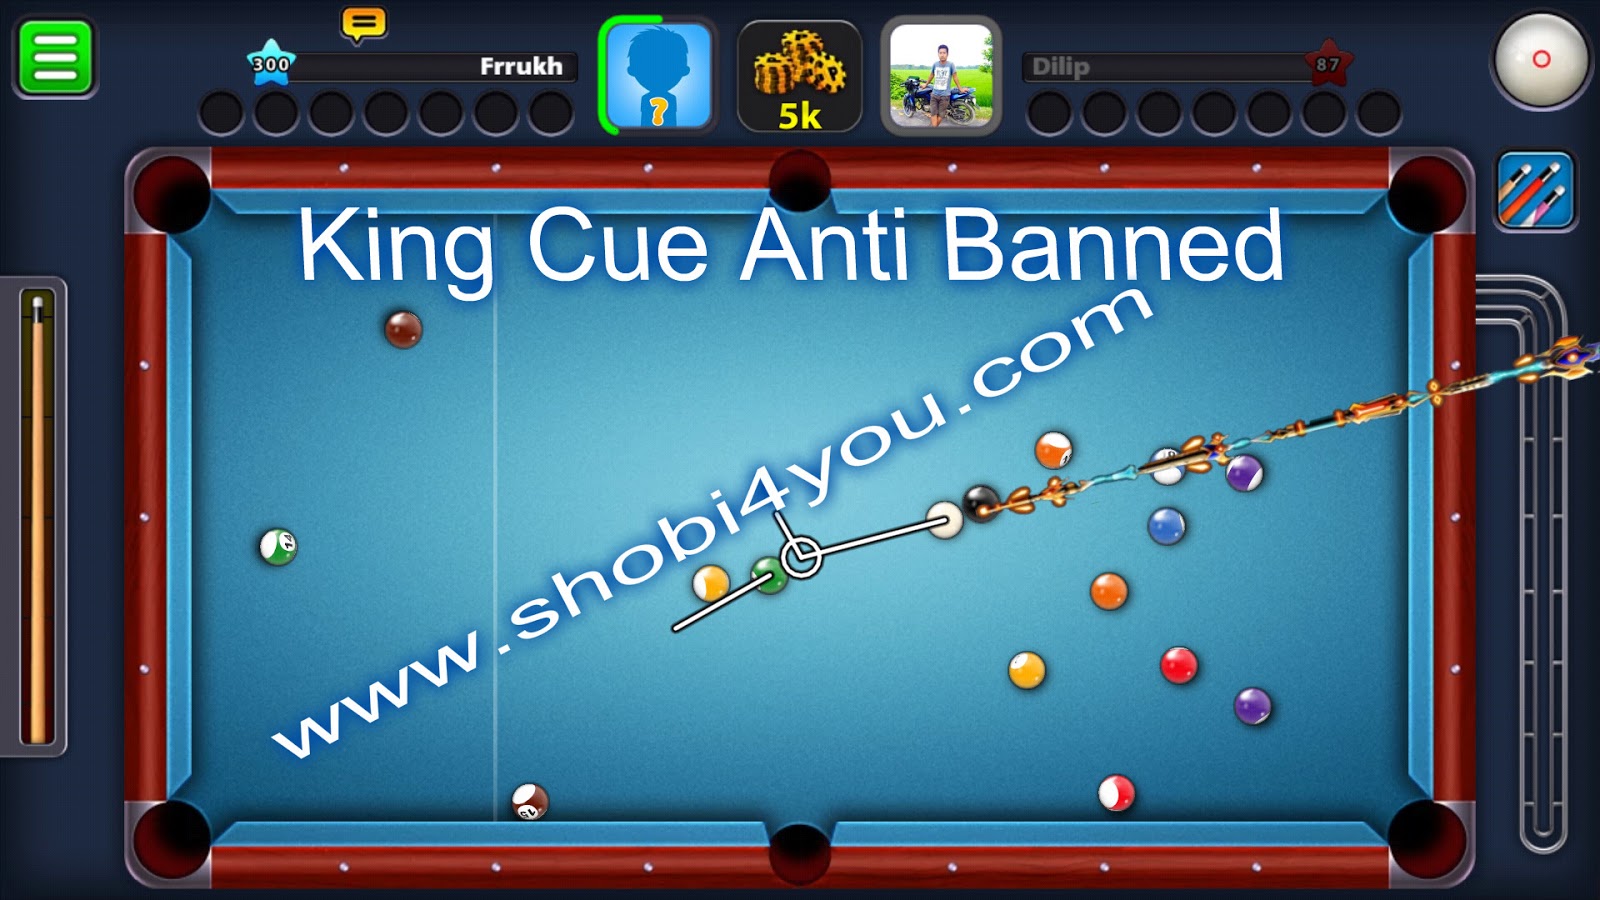 8 Ball Pool King Cue Mod Official Game Anti Banned 3.11.3 ... - 